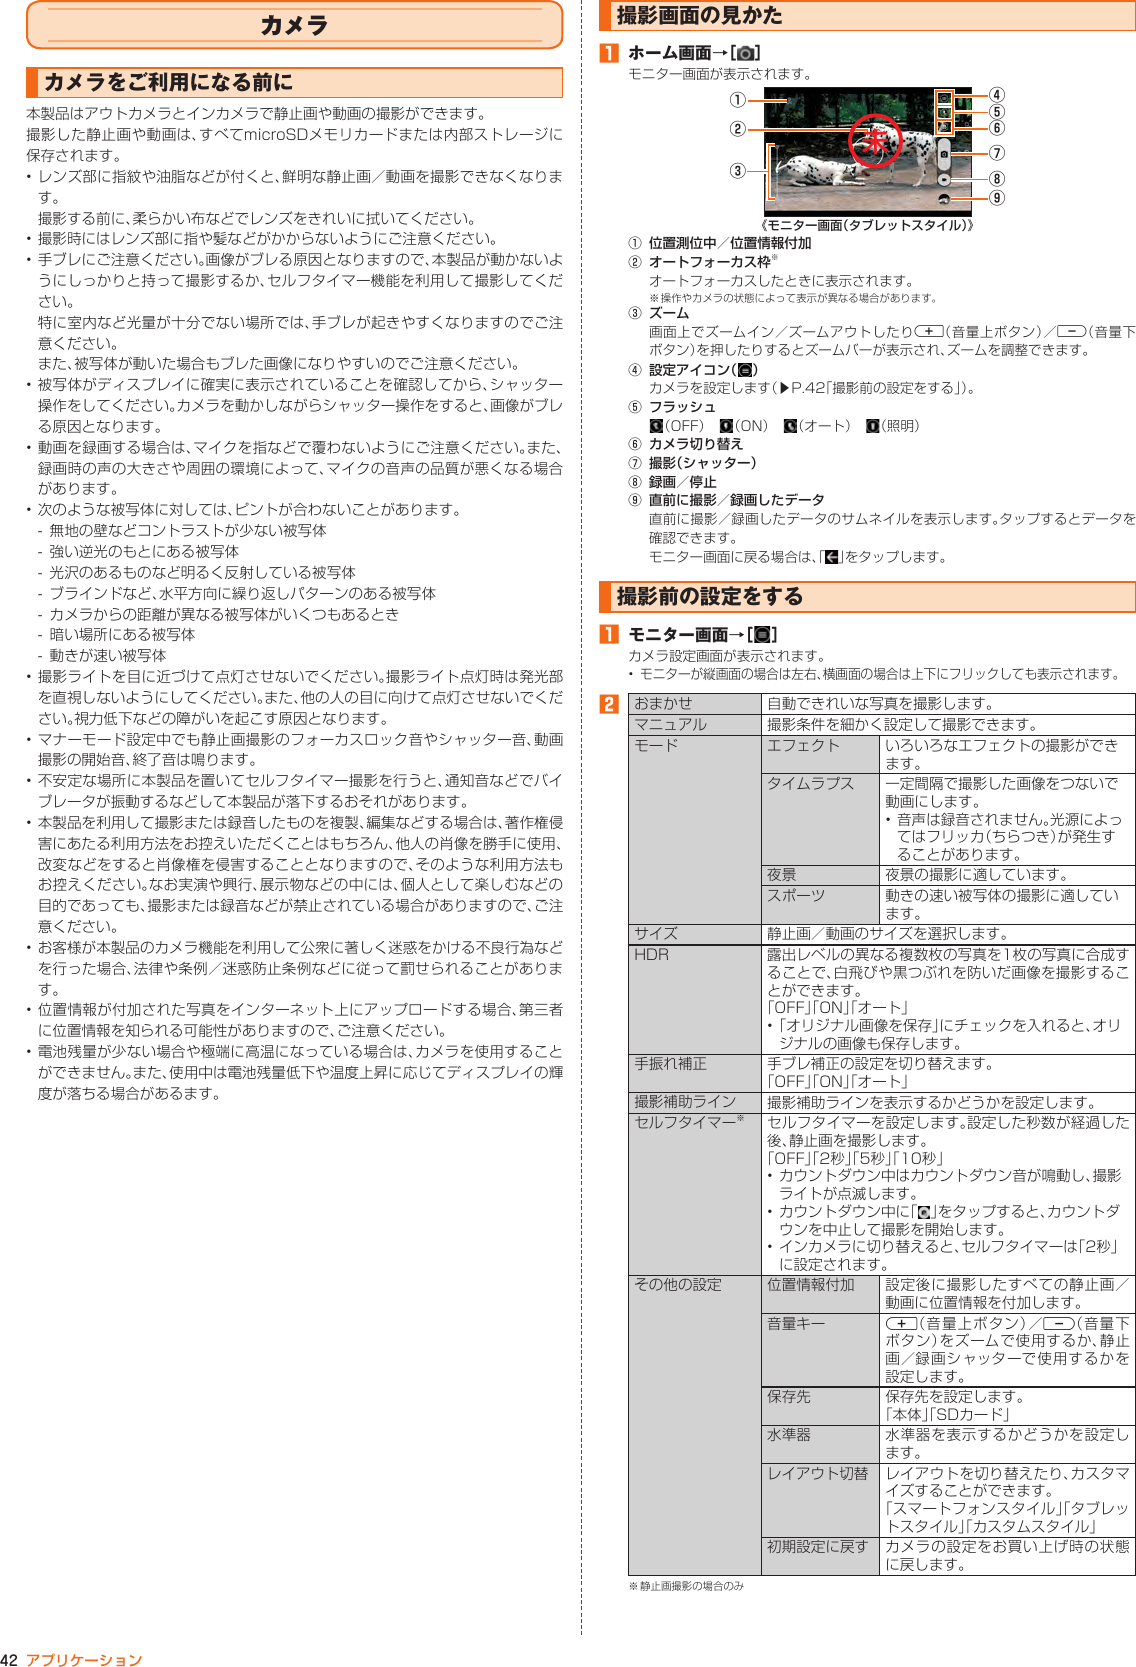 Page 43 of Kyocera FA85 Tablet User Manual 2